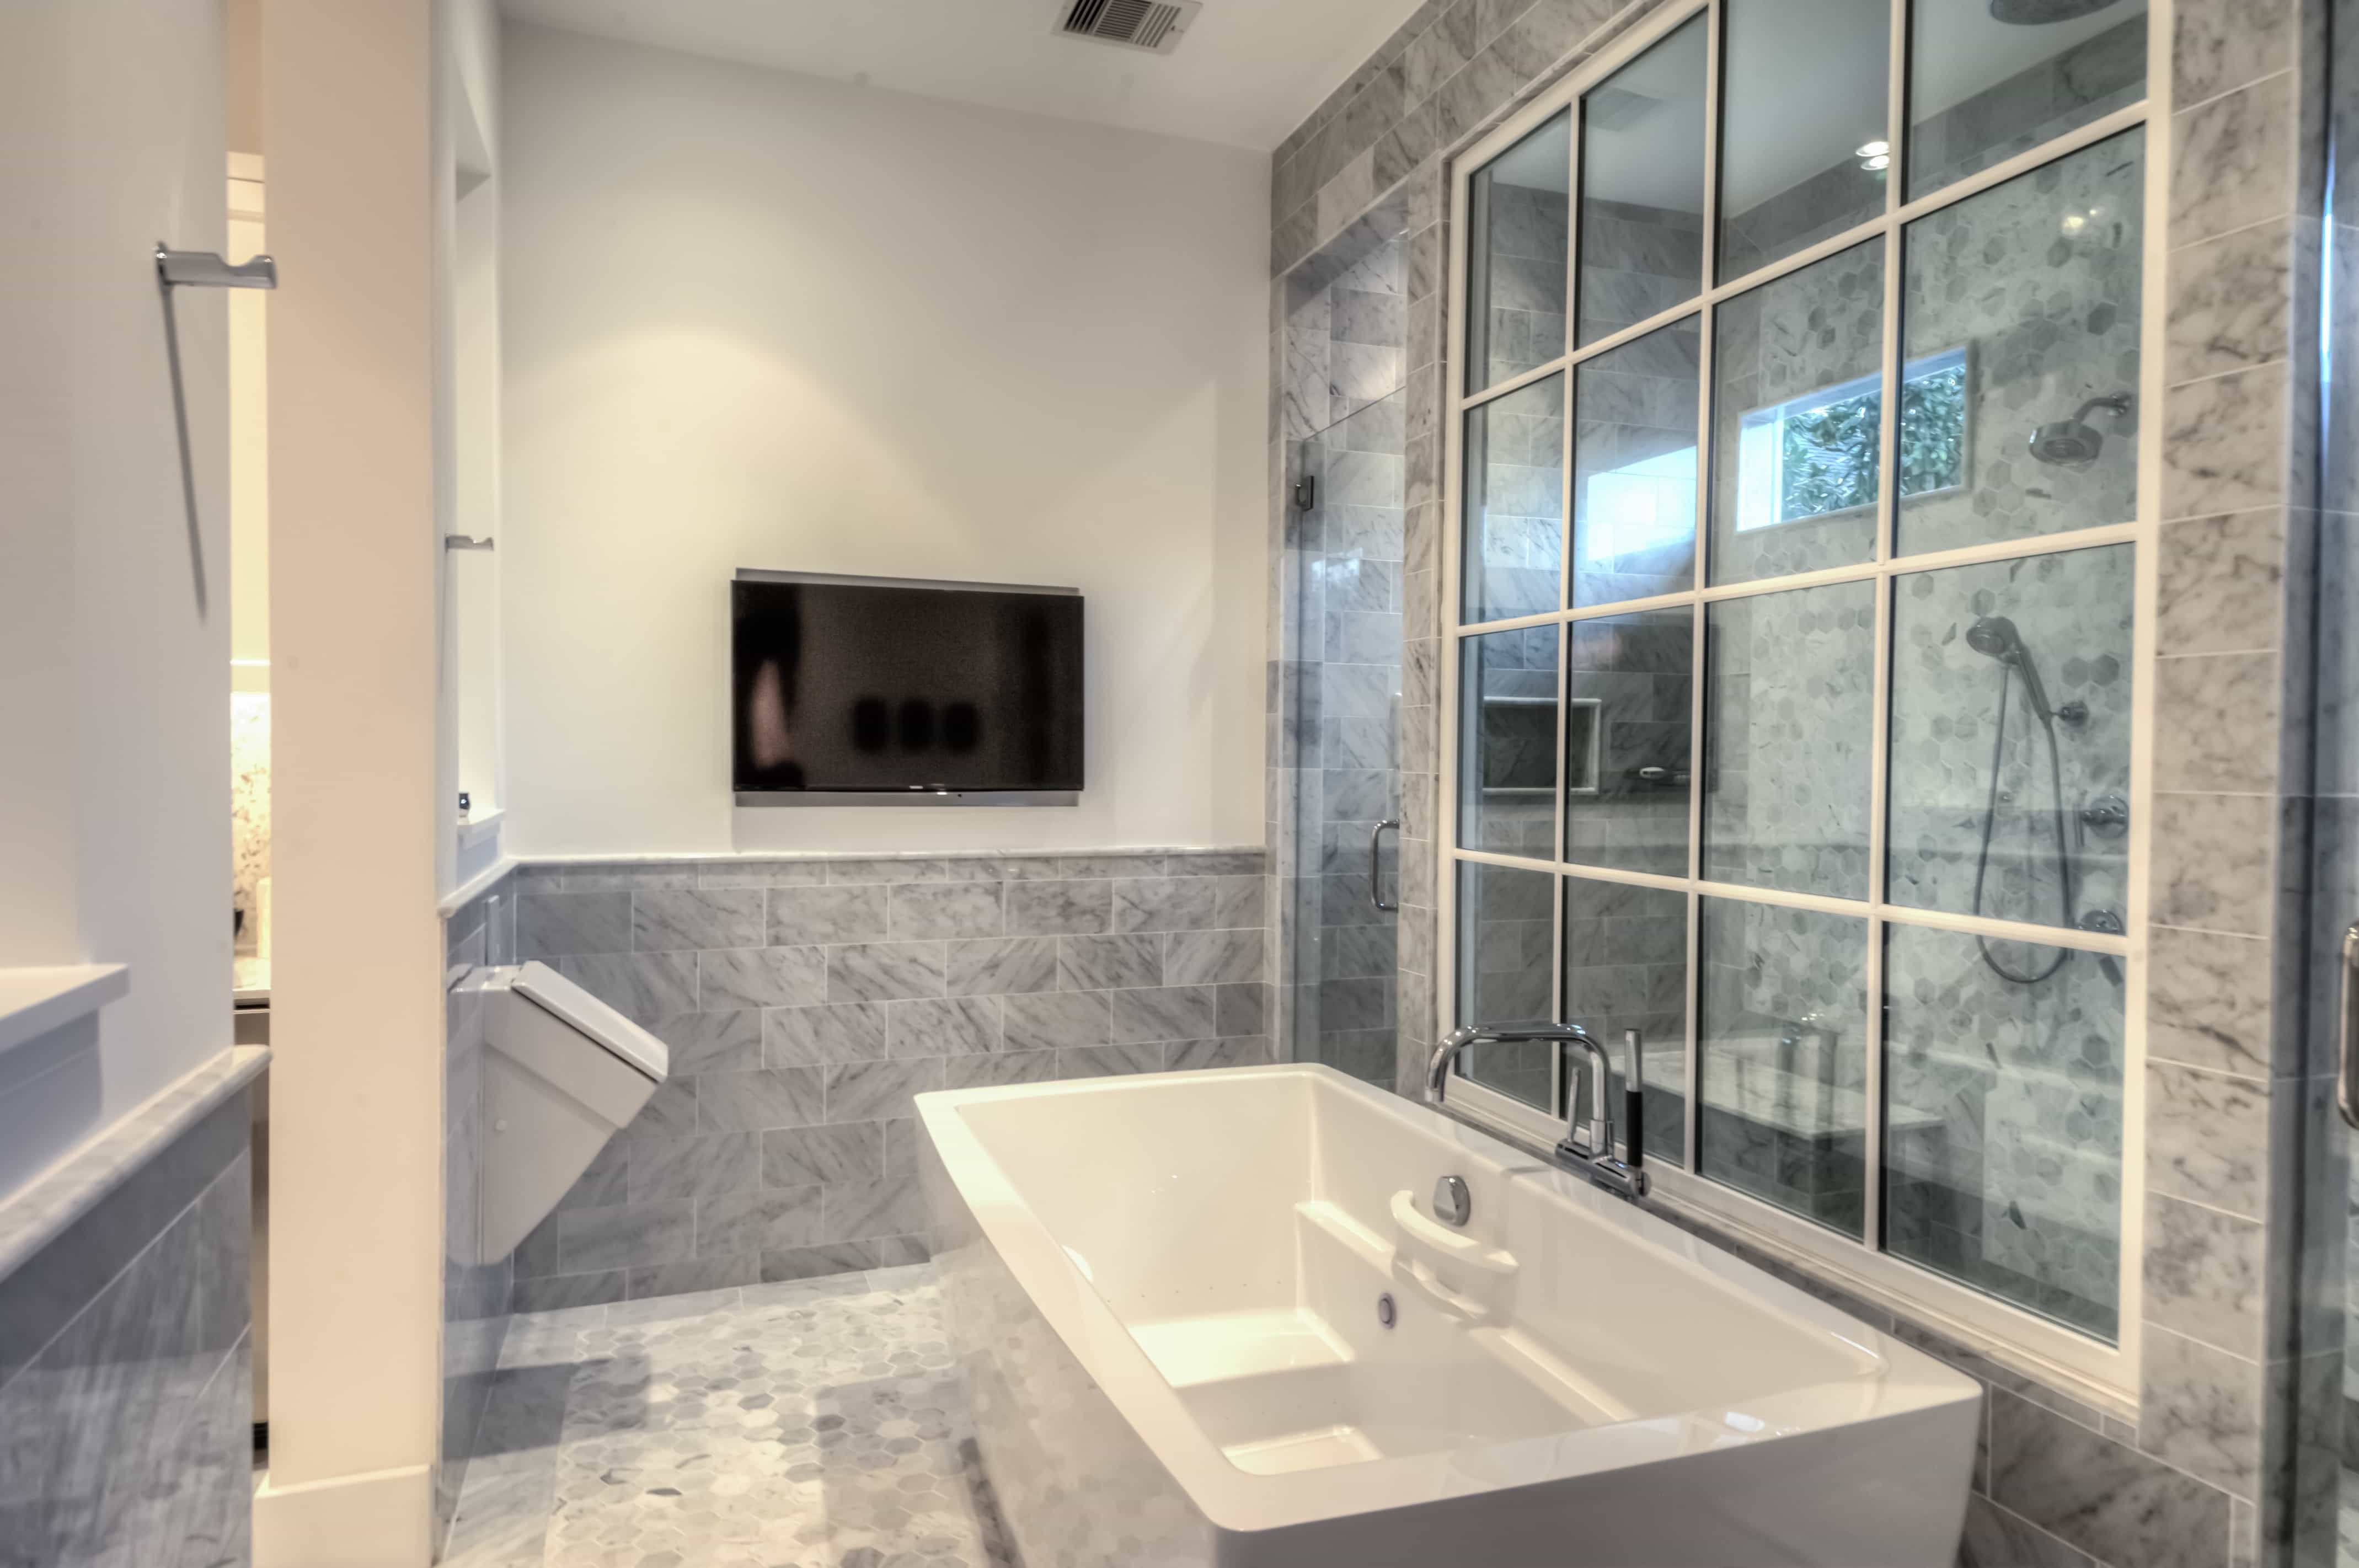 Flat TV Installation For Modern Bathroom With Marble Tile (View 1 of 15)